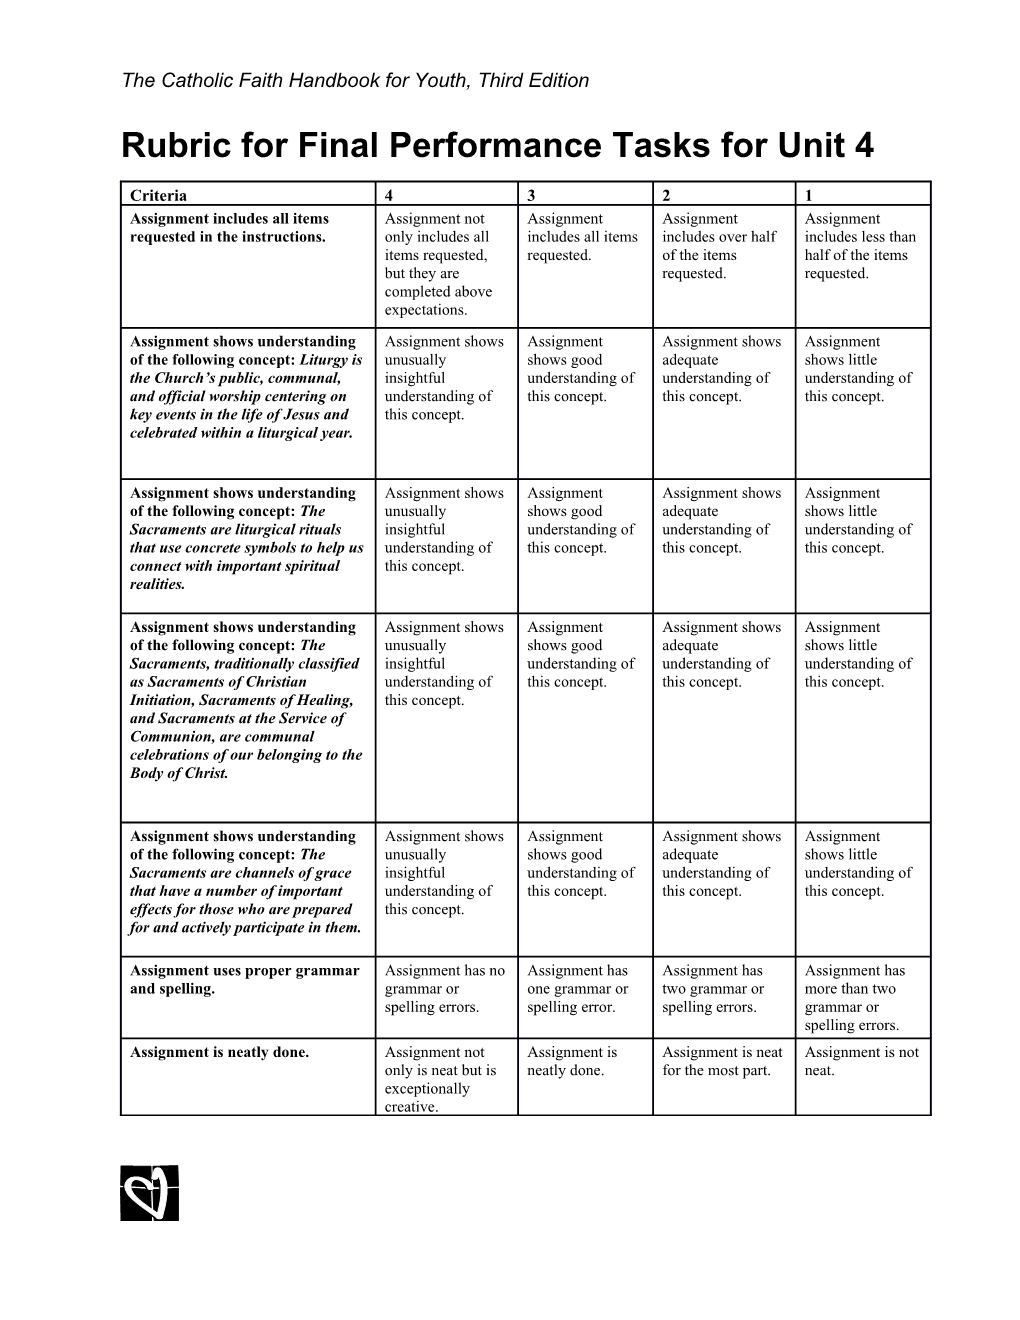 Rubric for Final Performance Tasks for Unit 4